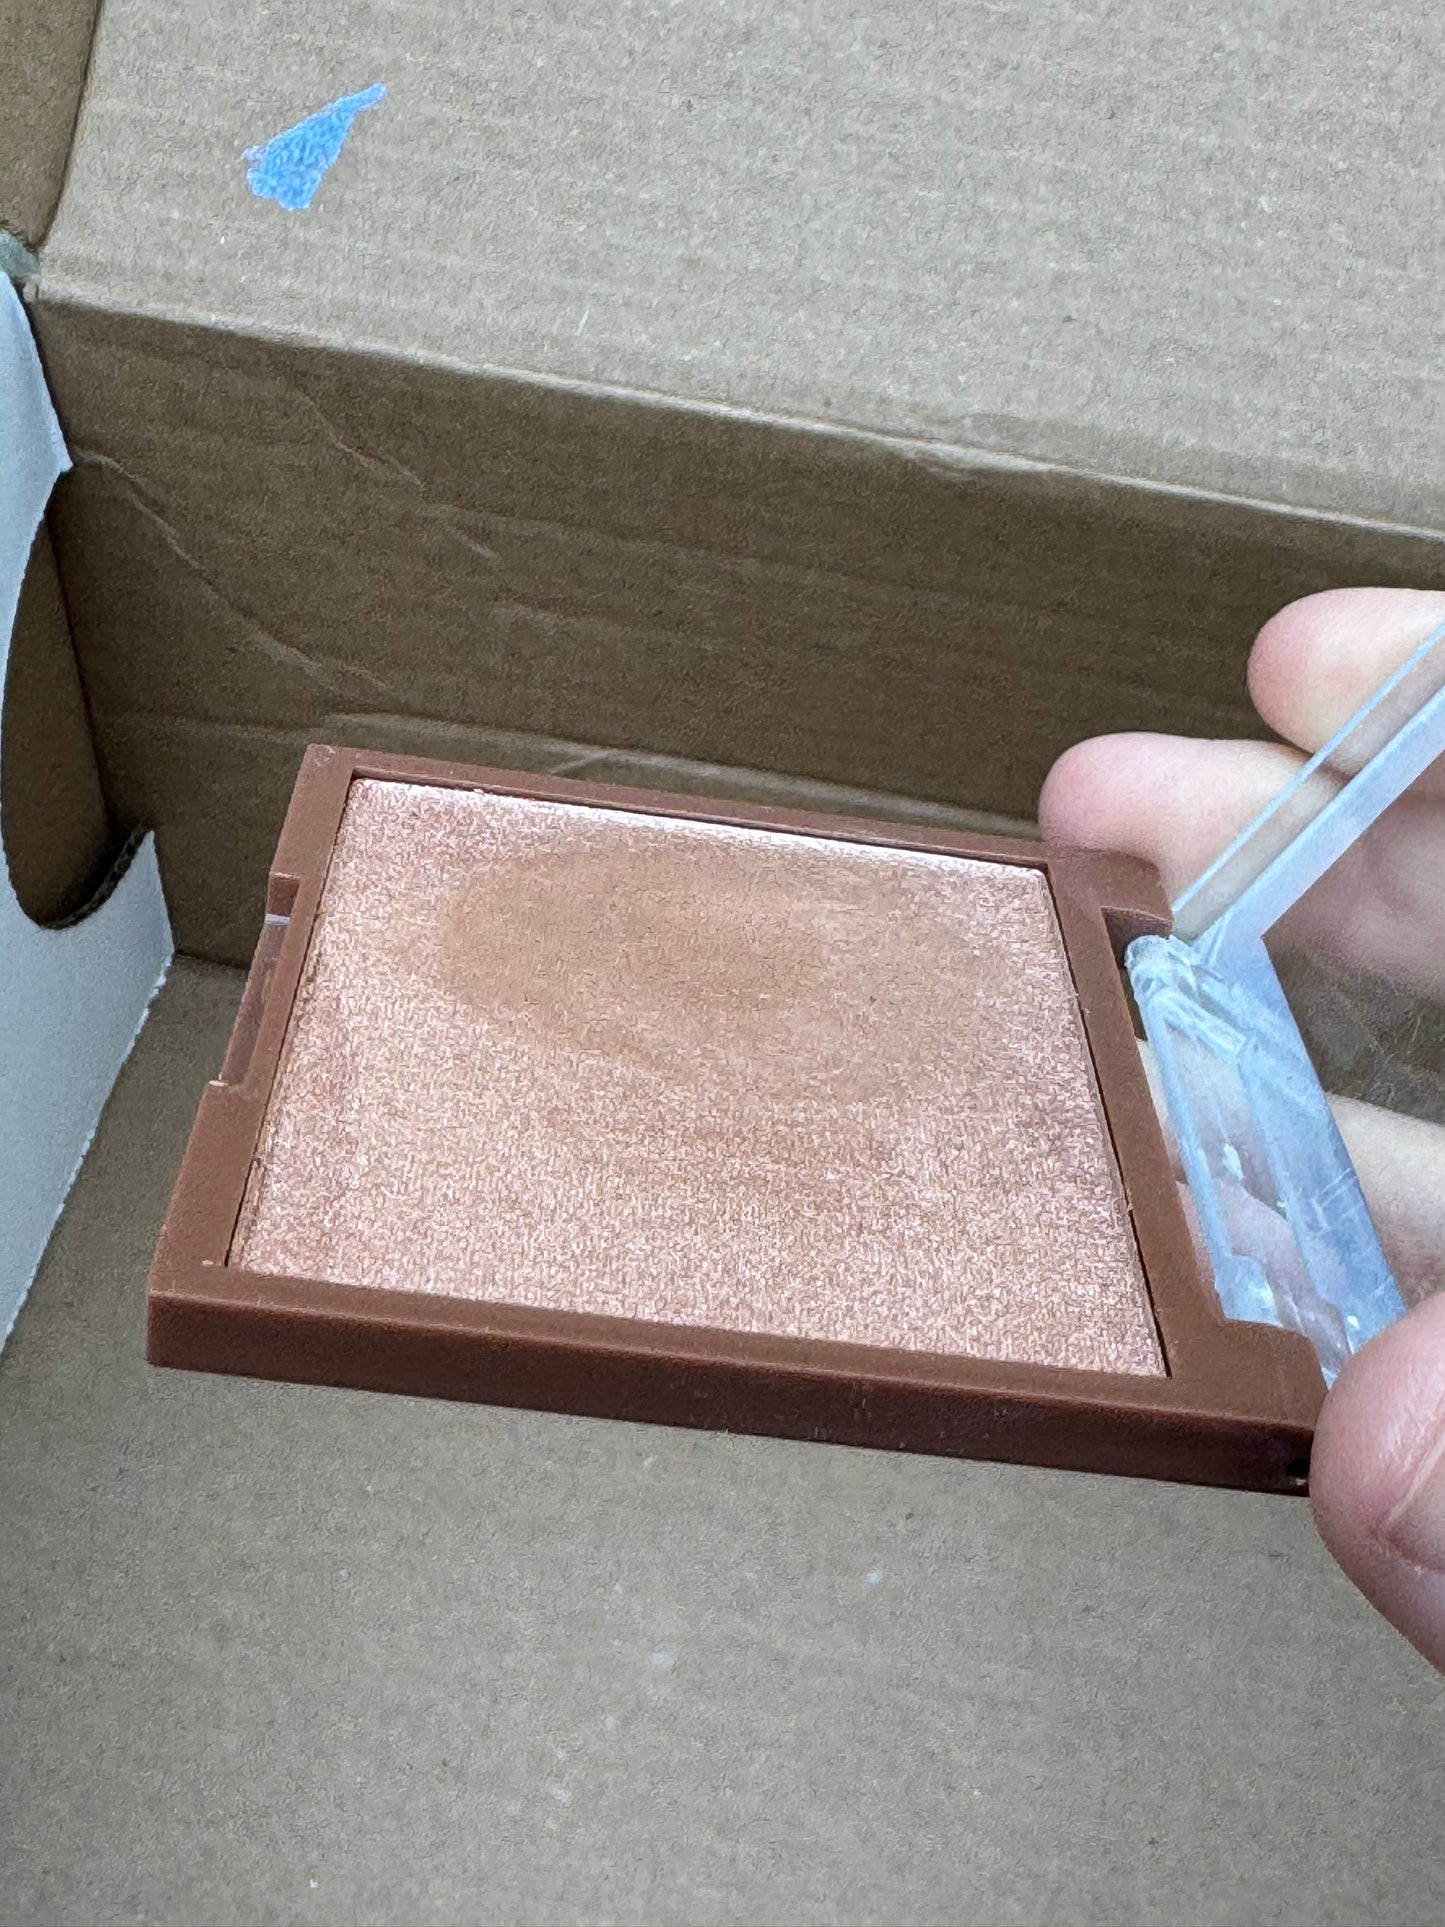 Steve Laurant Beauty Jelly Highlighter in Prosecco Please